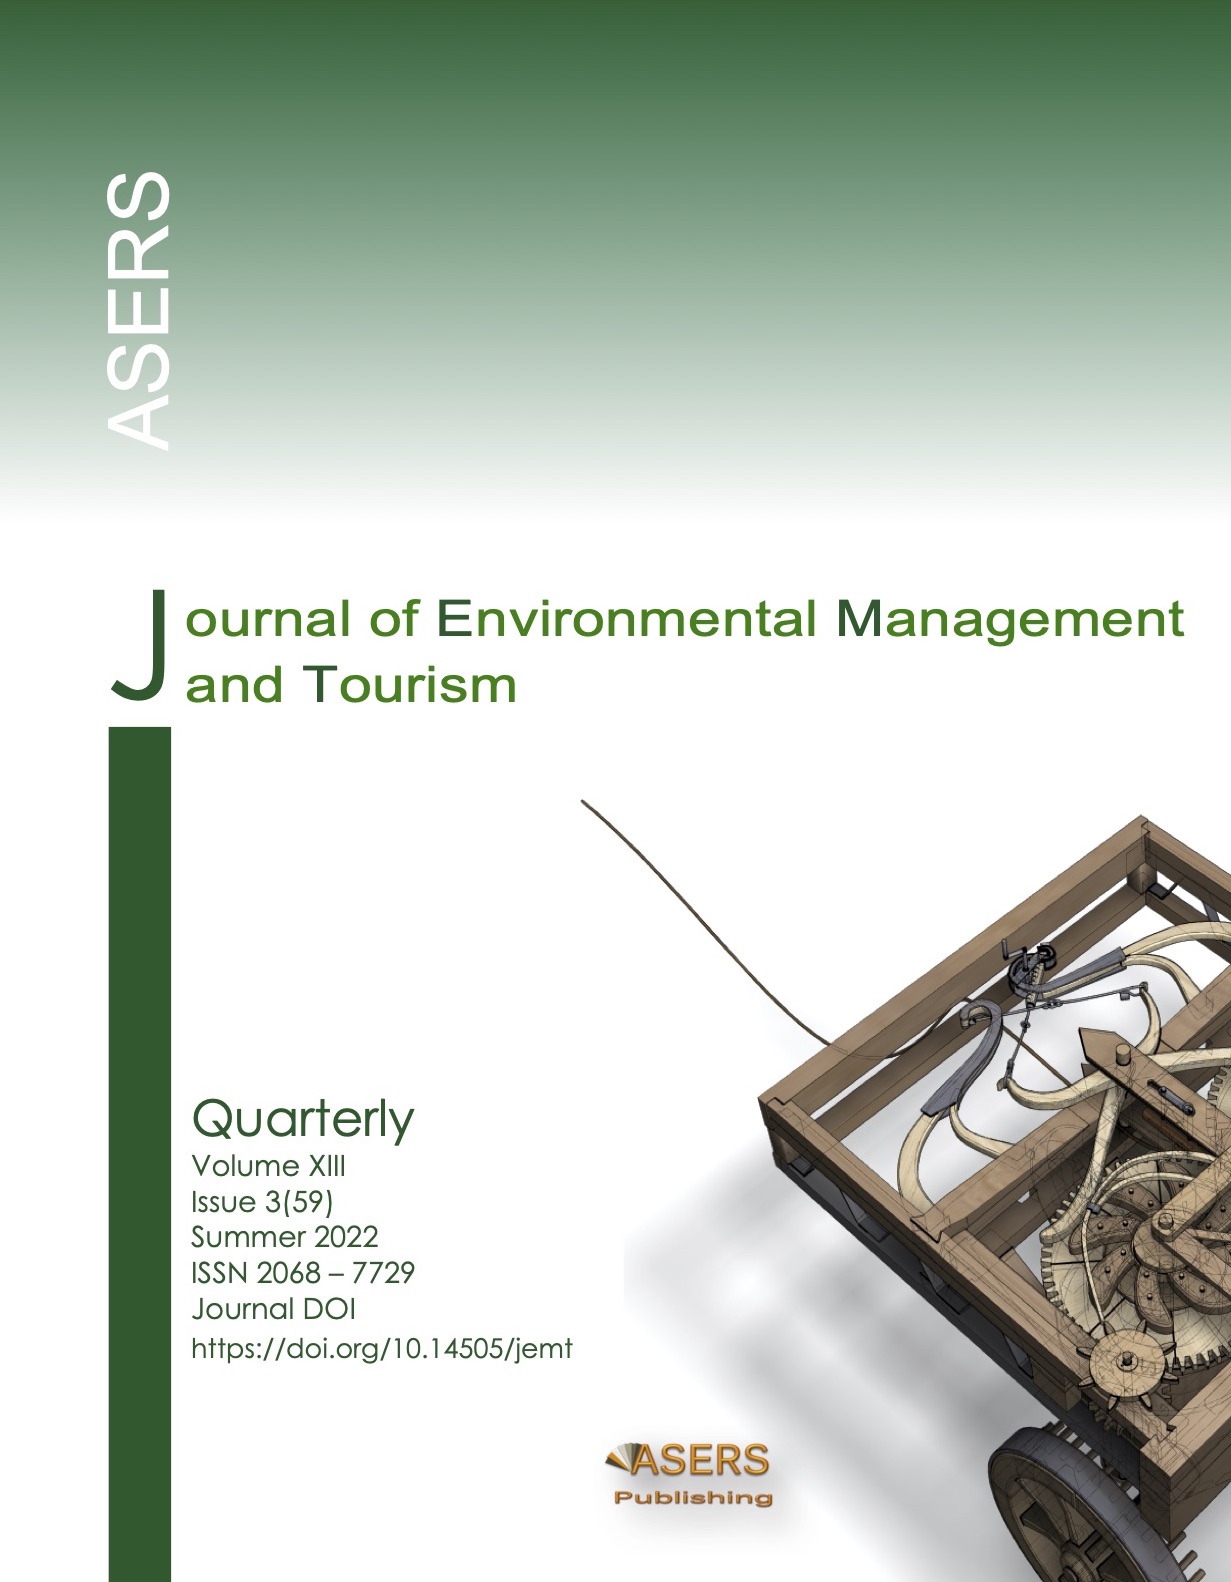 Legal Significance of Digitalization of Environmental Information in Ensuring Environmental Safety